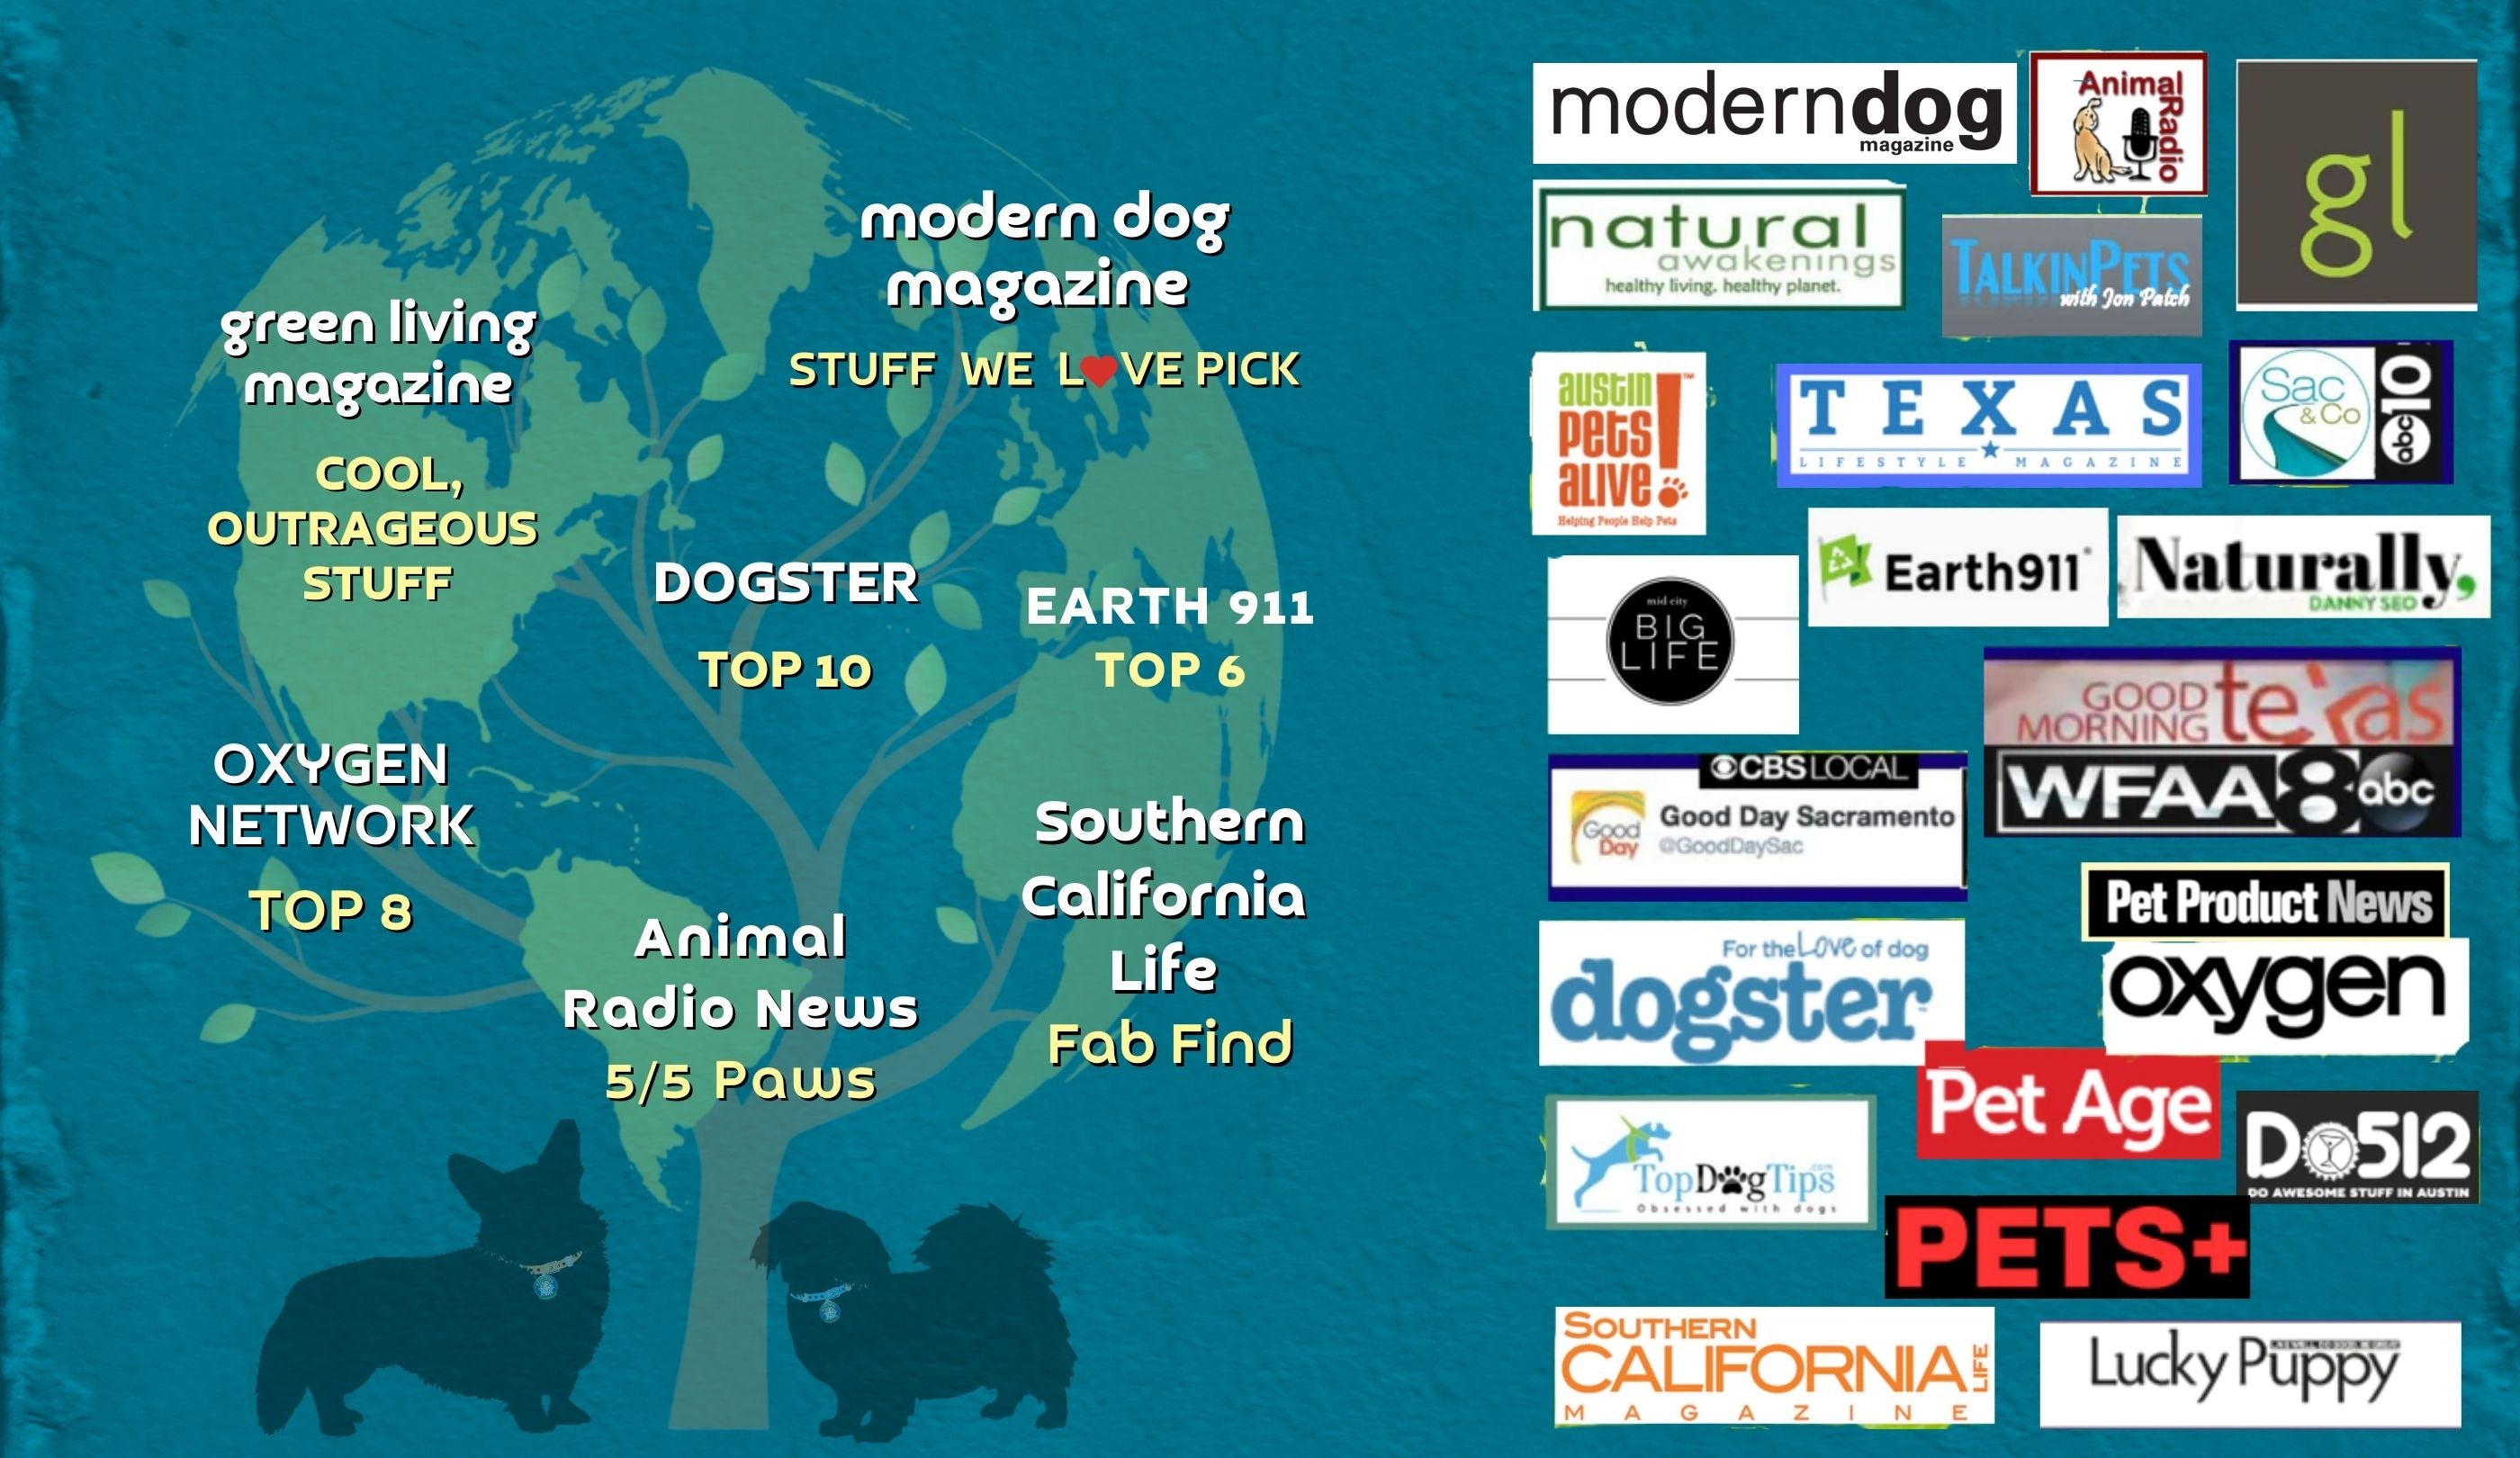 media coverage of eco dog products in pet interest, industry and lifestyle channels. recognition given as well as the images of each channel.